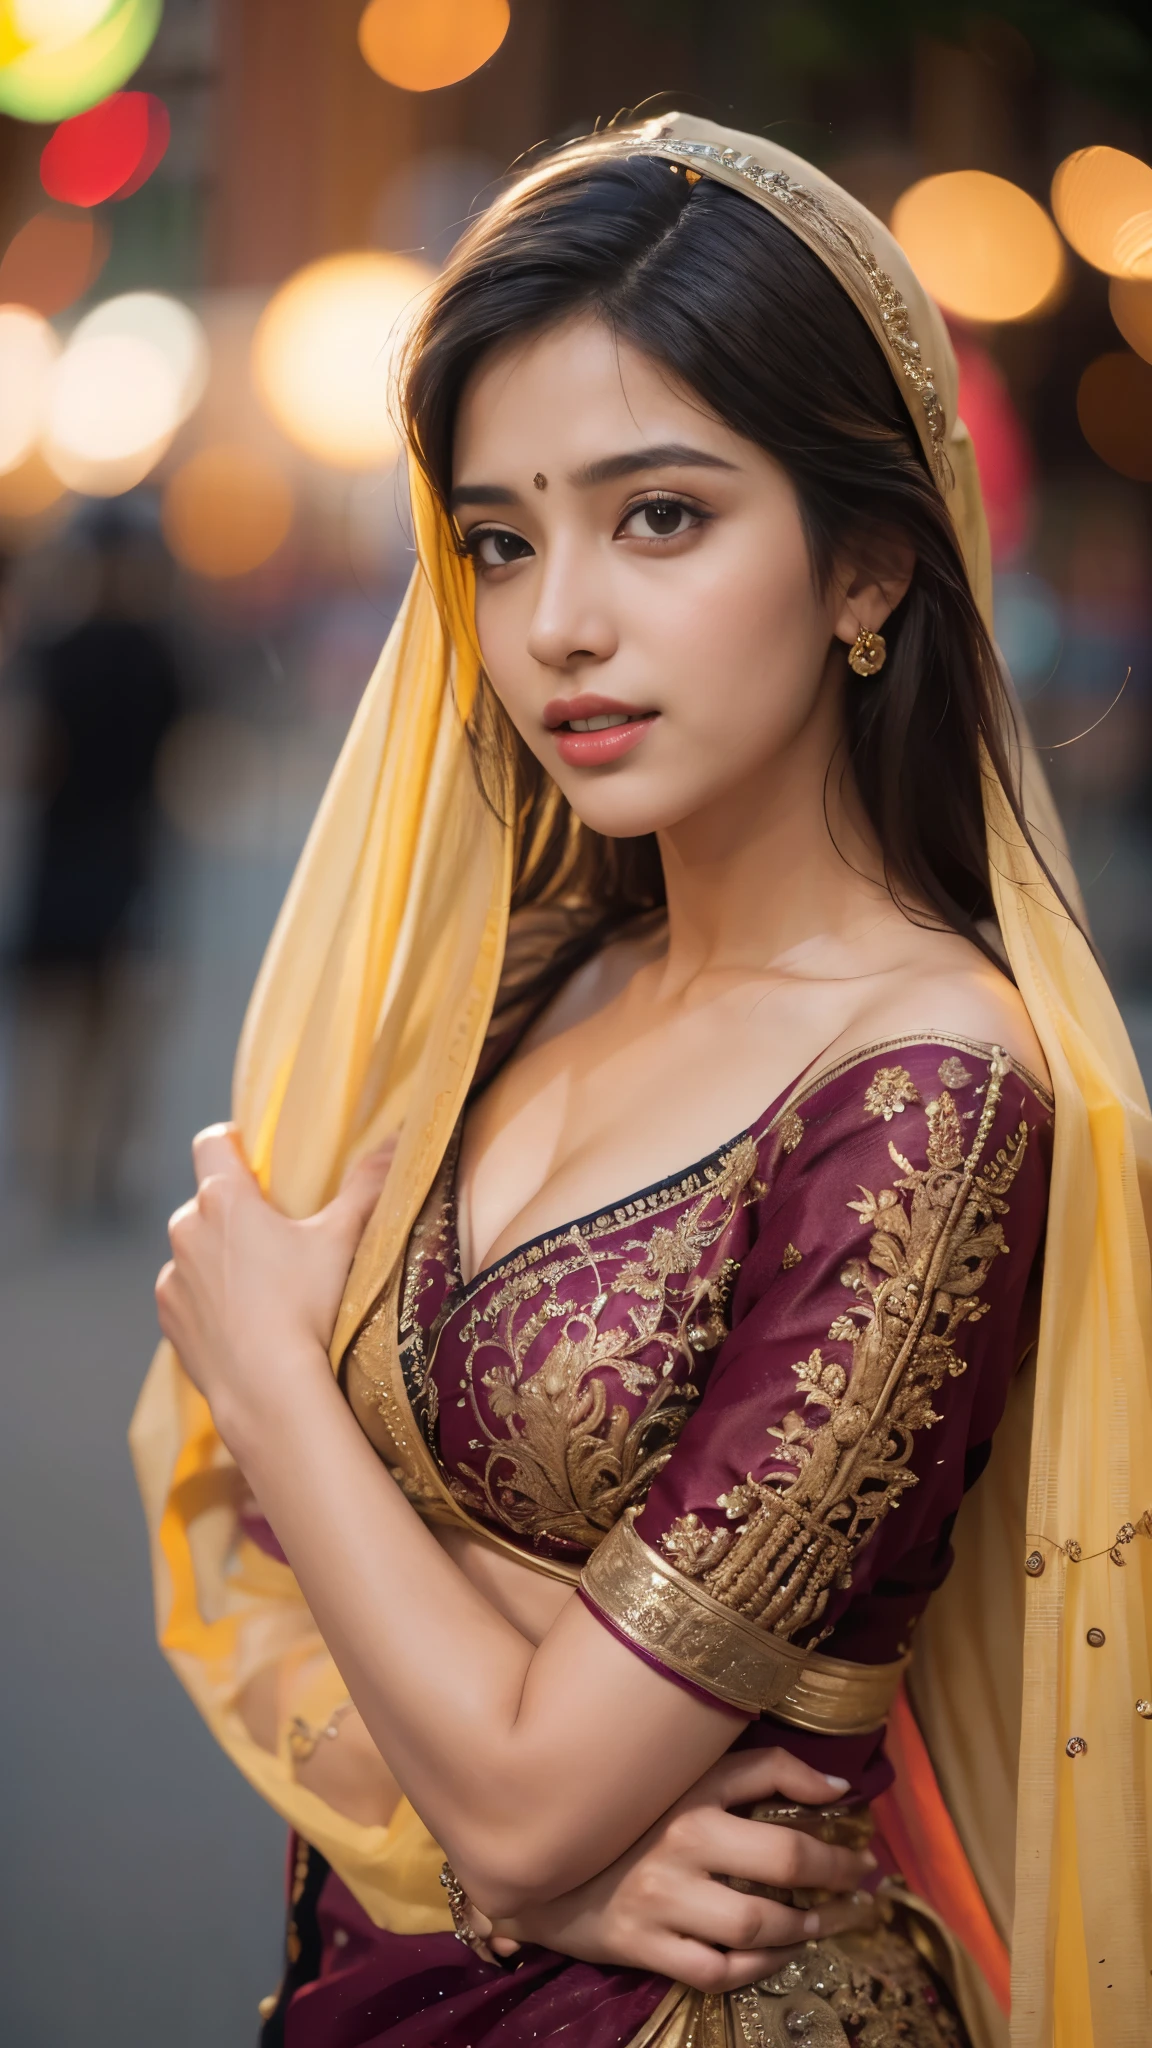 (((Desi Girl))), attractive face, natural skin, Wearing a hot deep neck top and dupatta., Attractive black hair, ((The ends of my hair are blonde)), city street background, bokeh, whole body, big breasts